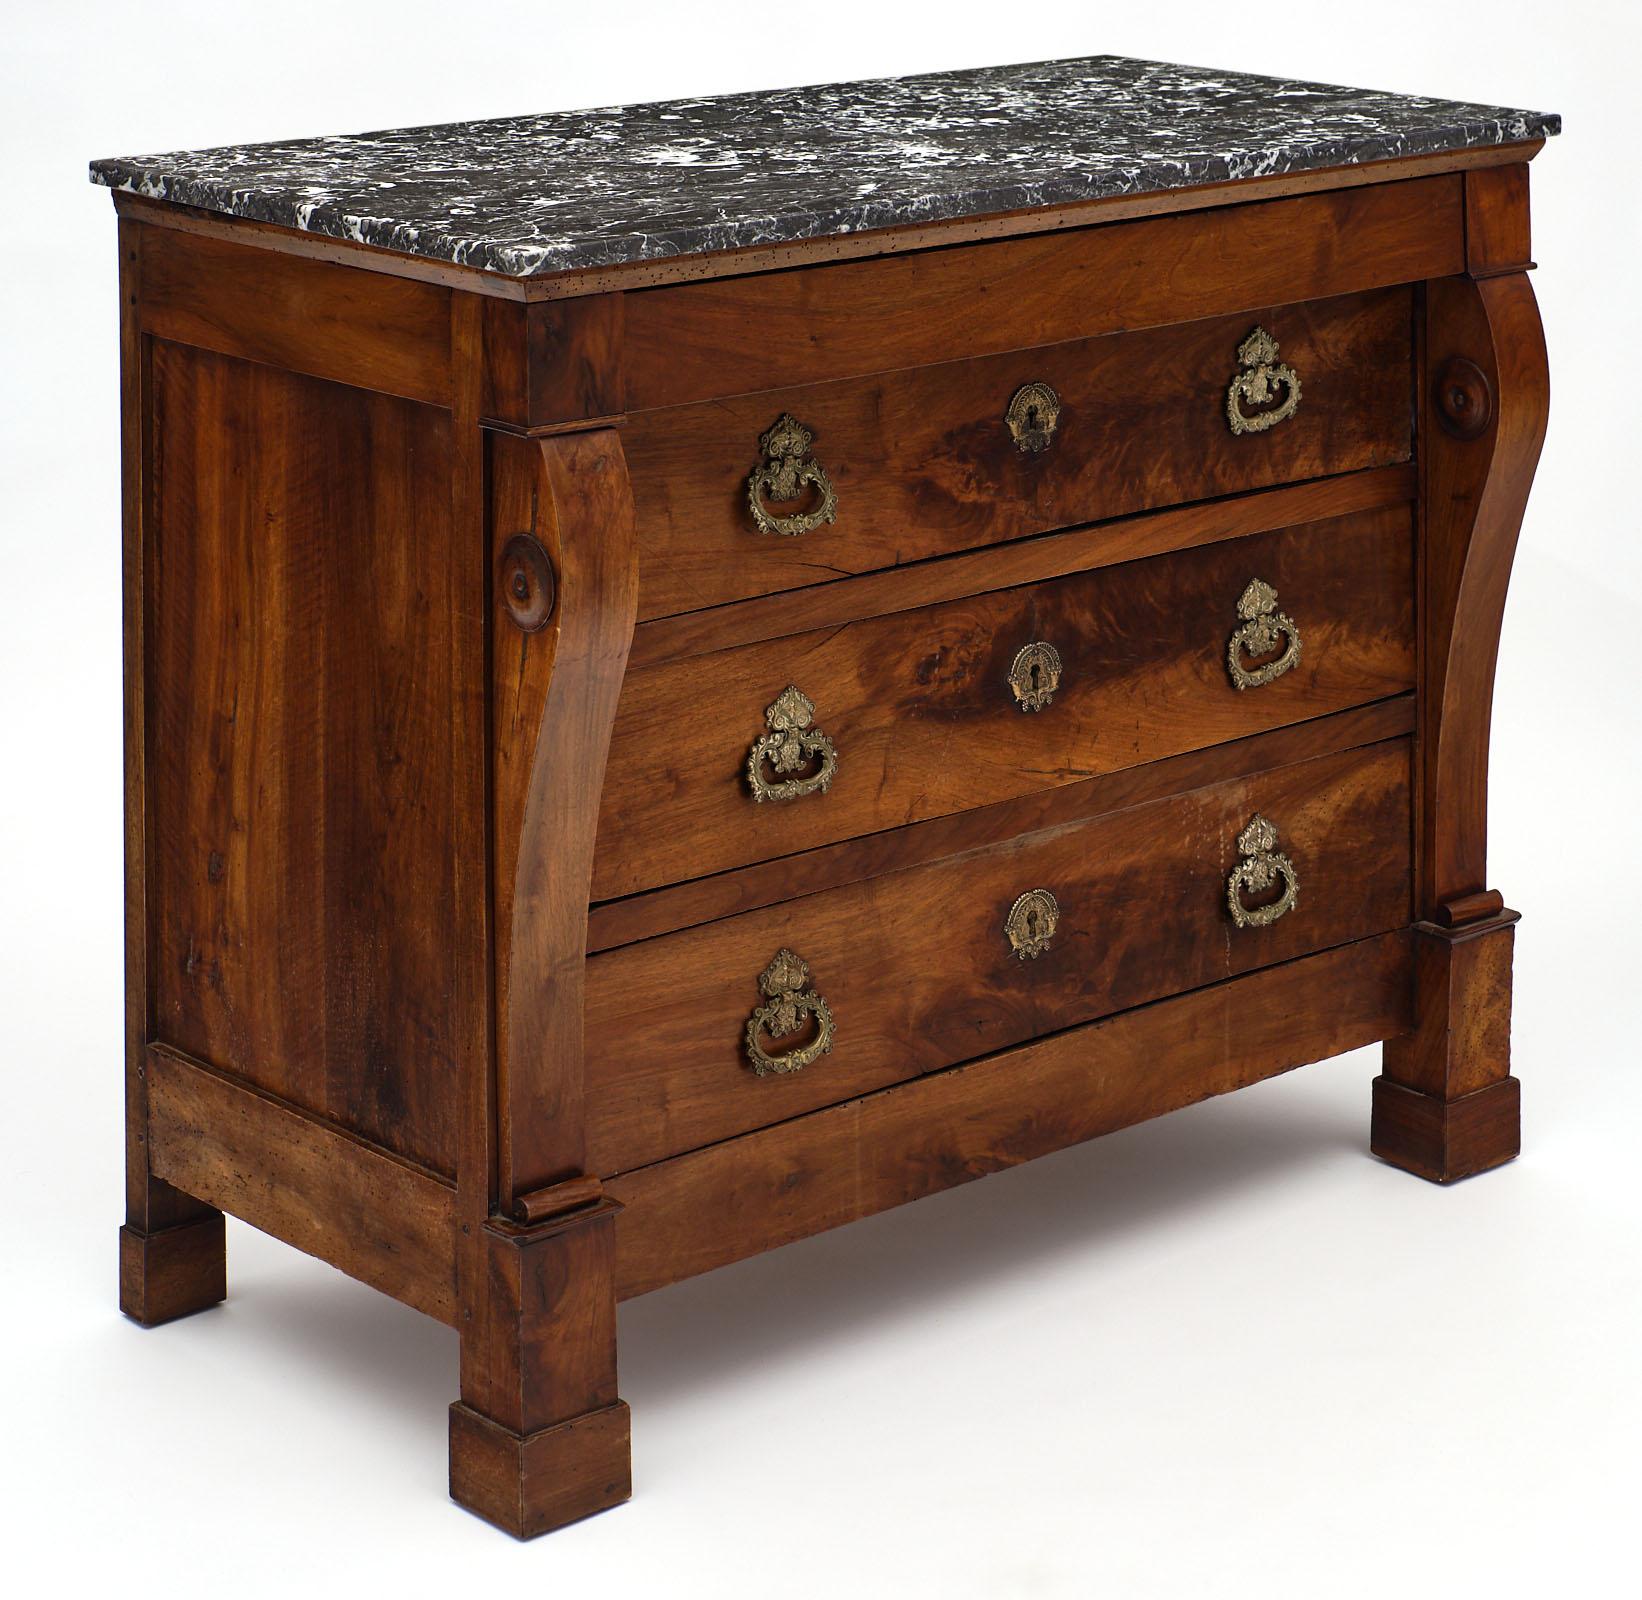 French Restauration period walnut chest of drawers with four dovetailed drawers. A fine French antique piece made of solid figured walnut with all original finely cast bronze hardware. The commode features columns on each side; typical of the